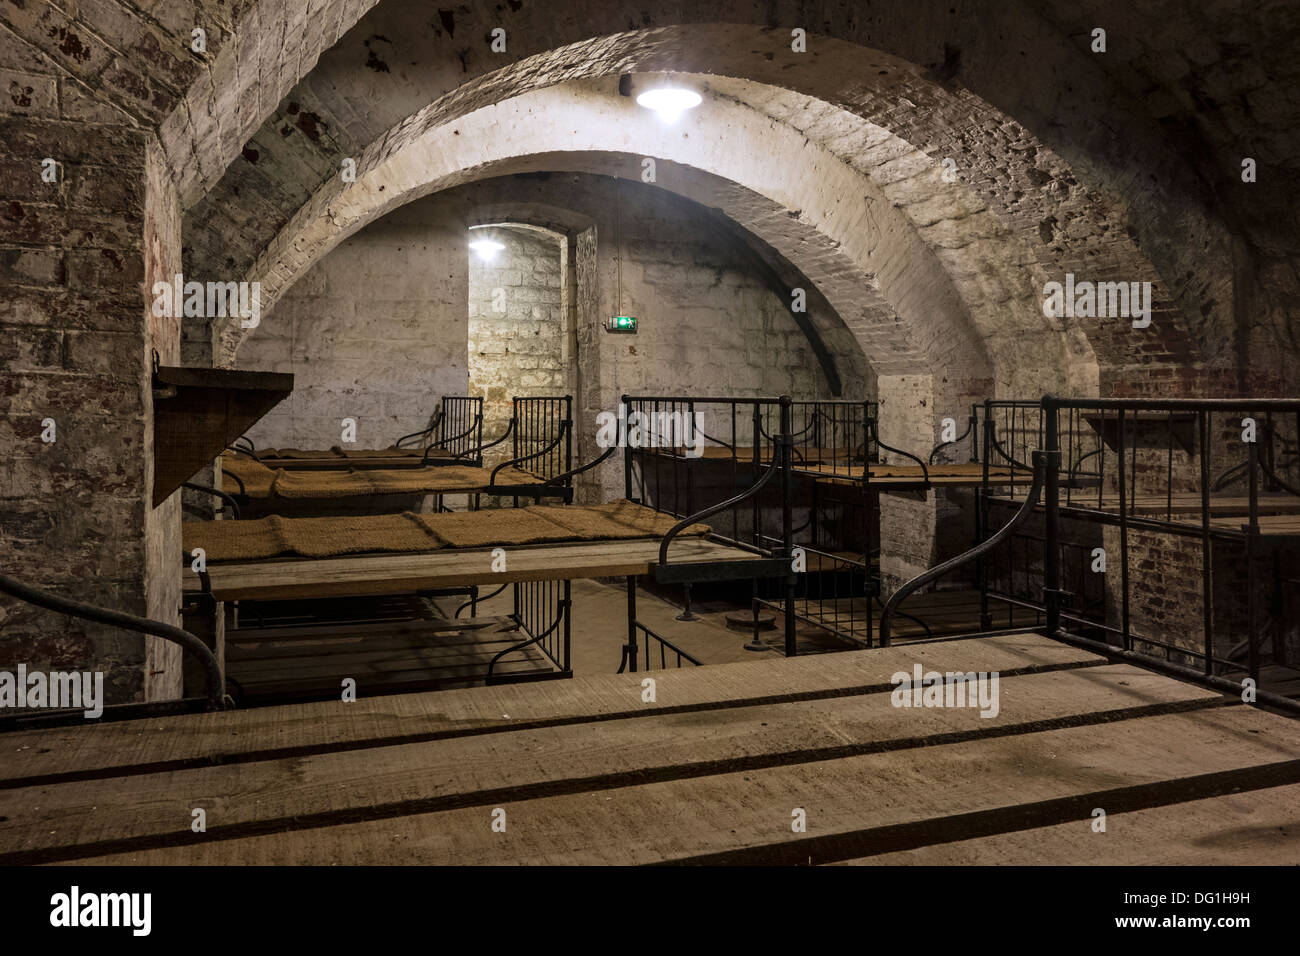 Dormitory with metal bunks in the First World War One Fort de Vaux at Vaux-Devant-Damloup, Lorraine, Battle of Verdun, France Stock Photo